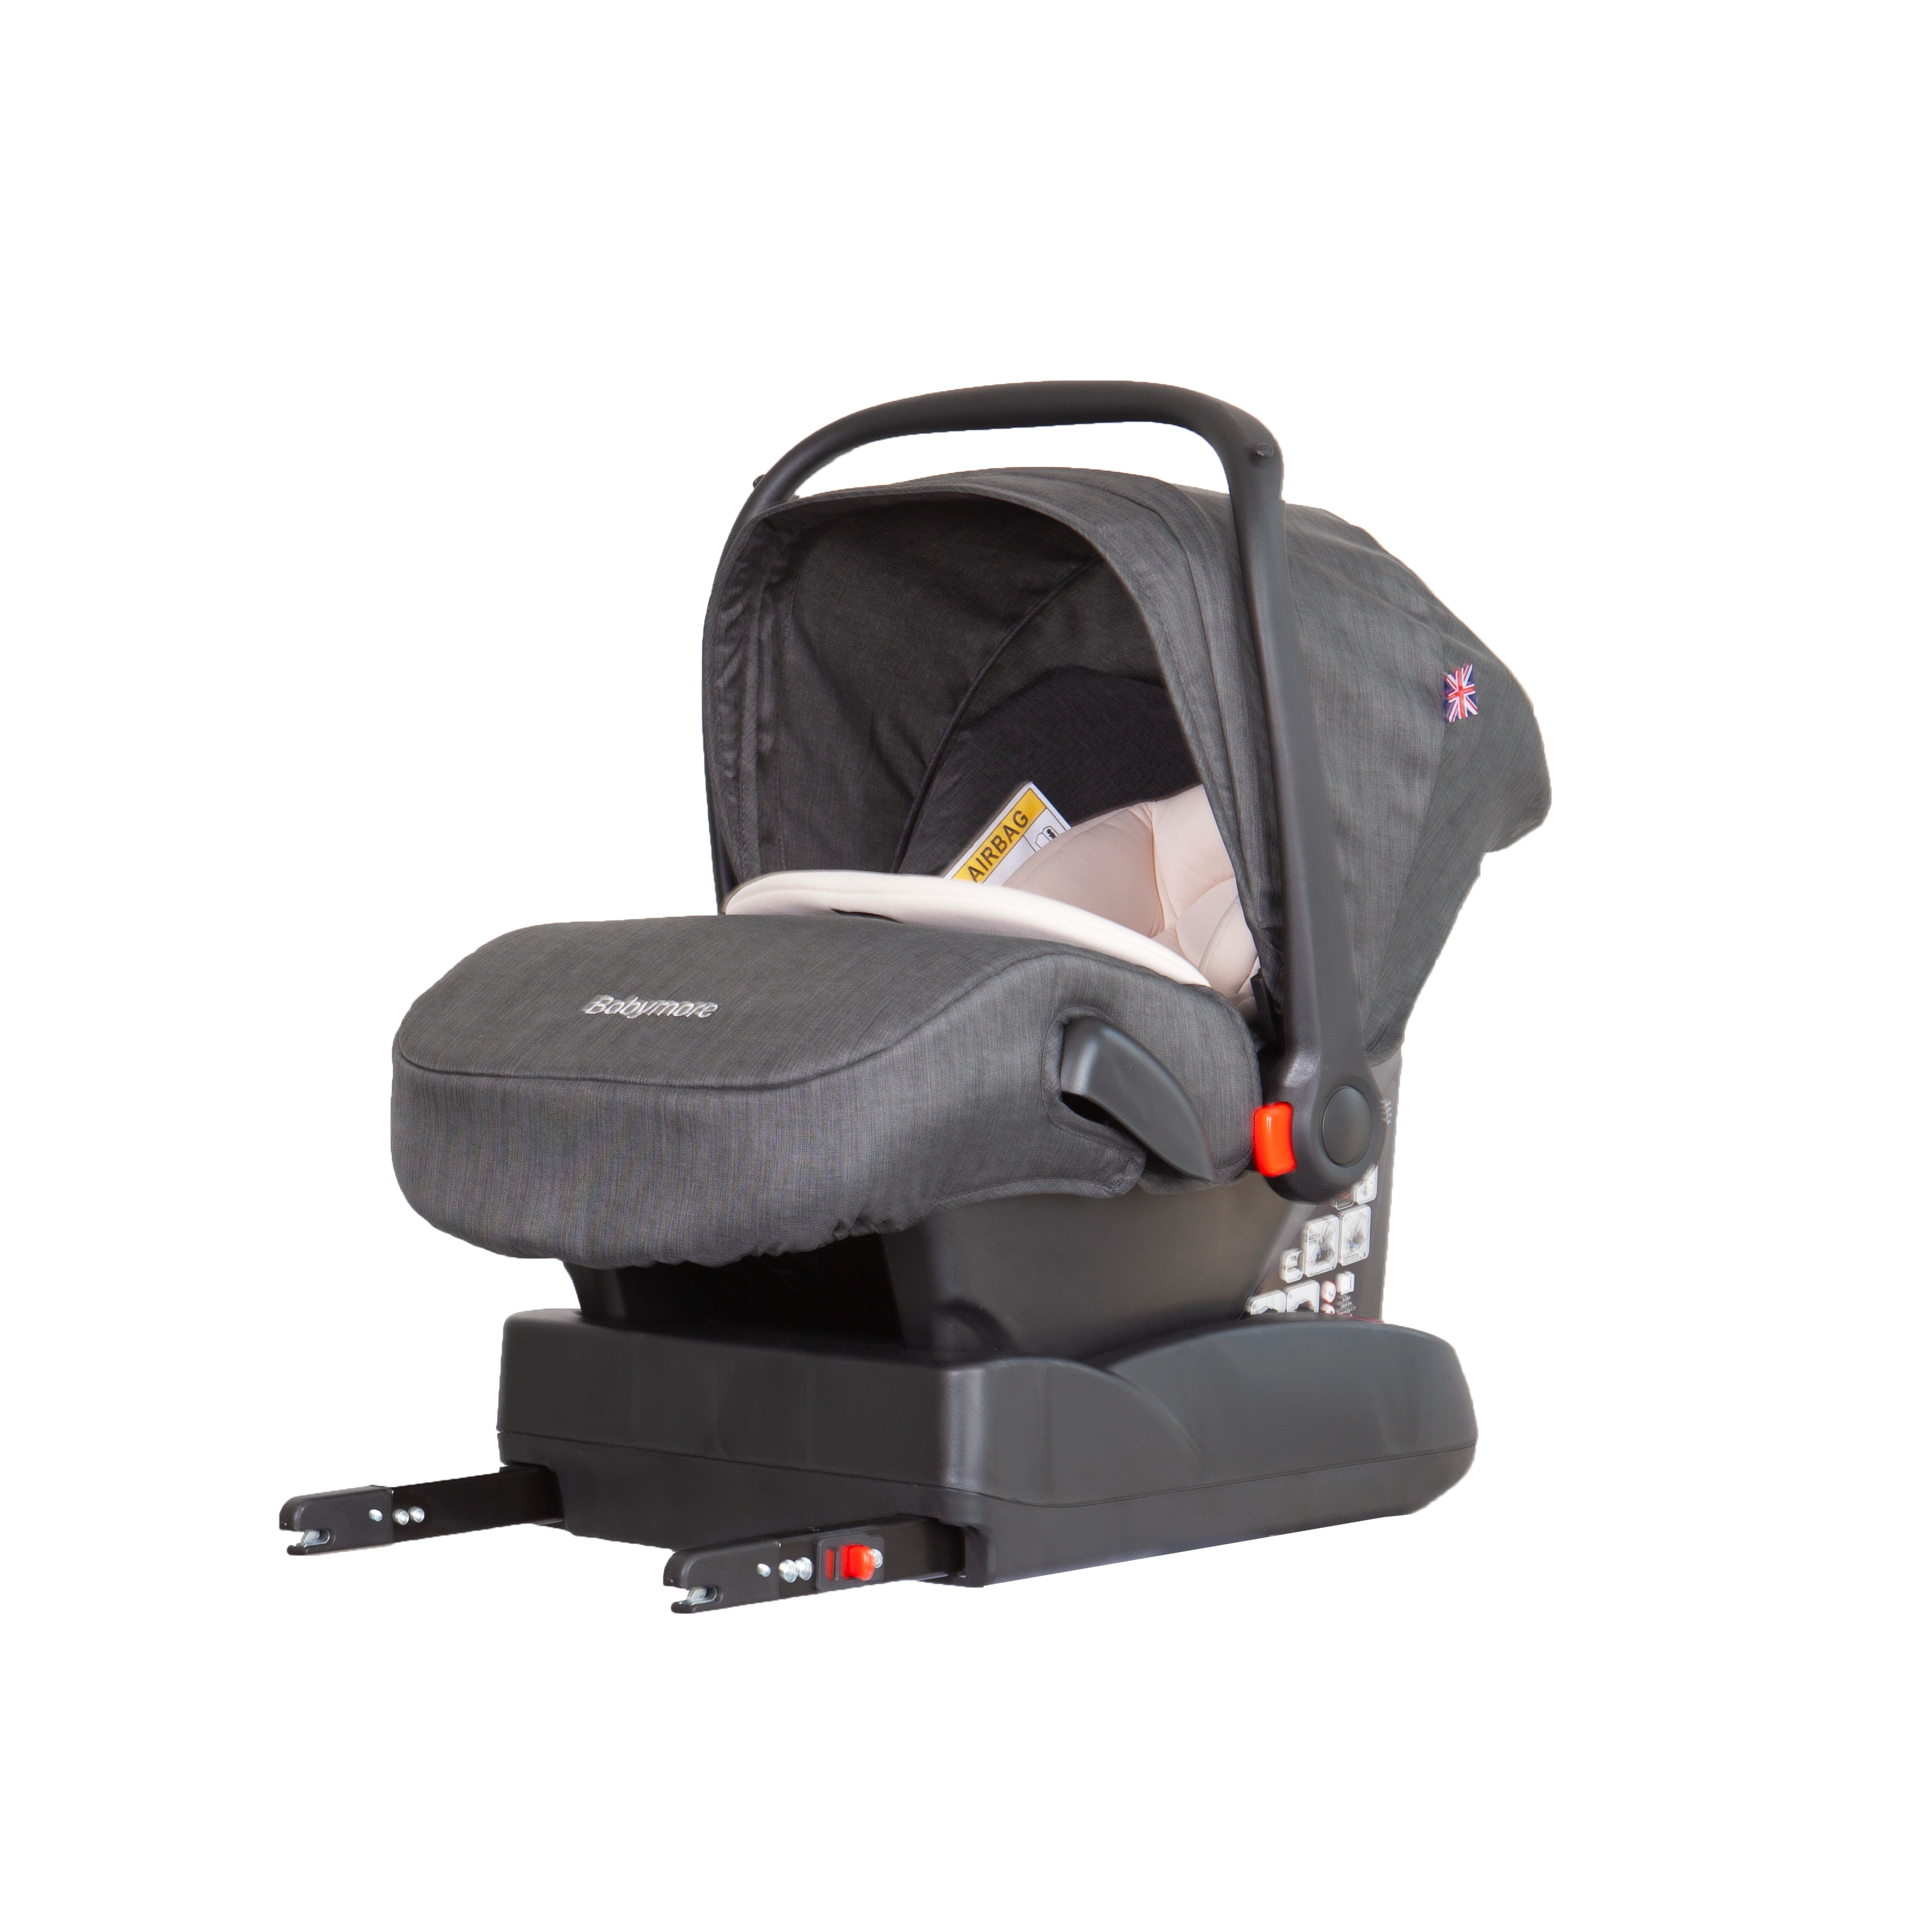 Portable Infant Car Seat with Isofix with Base